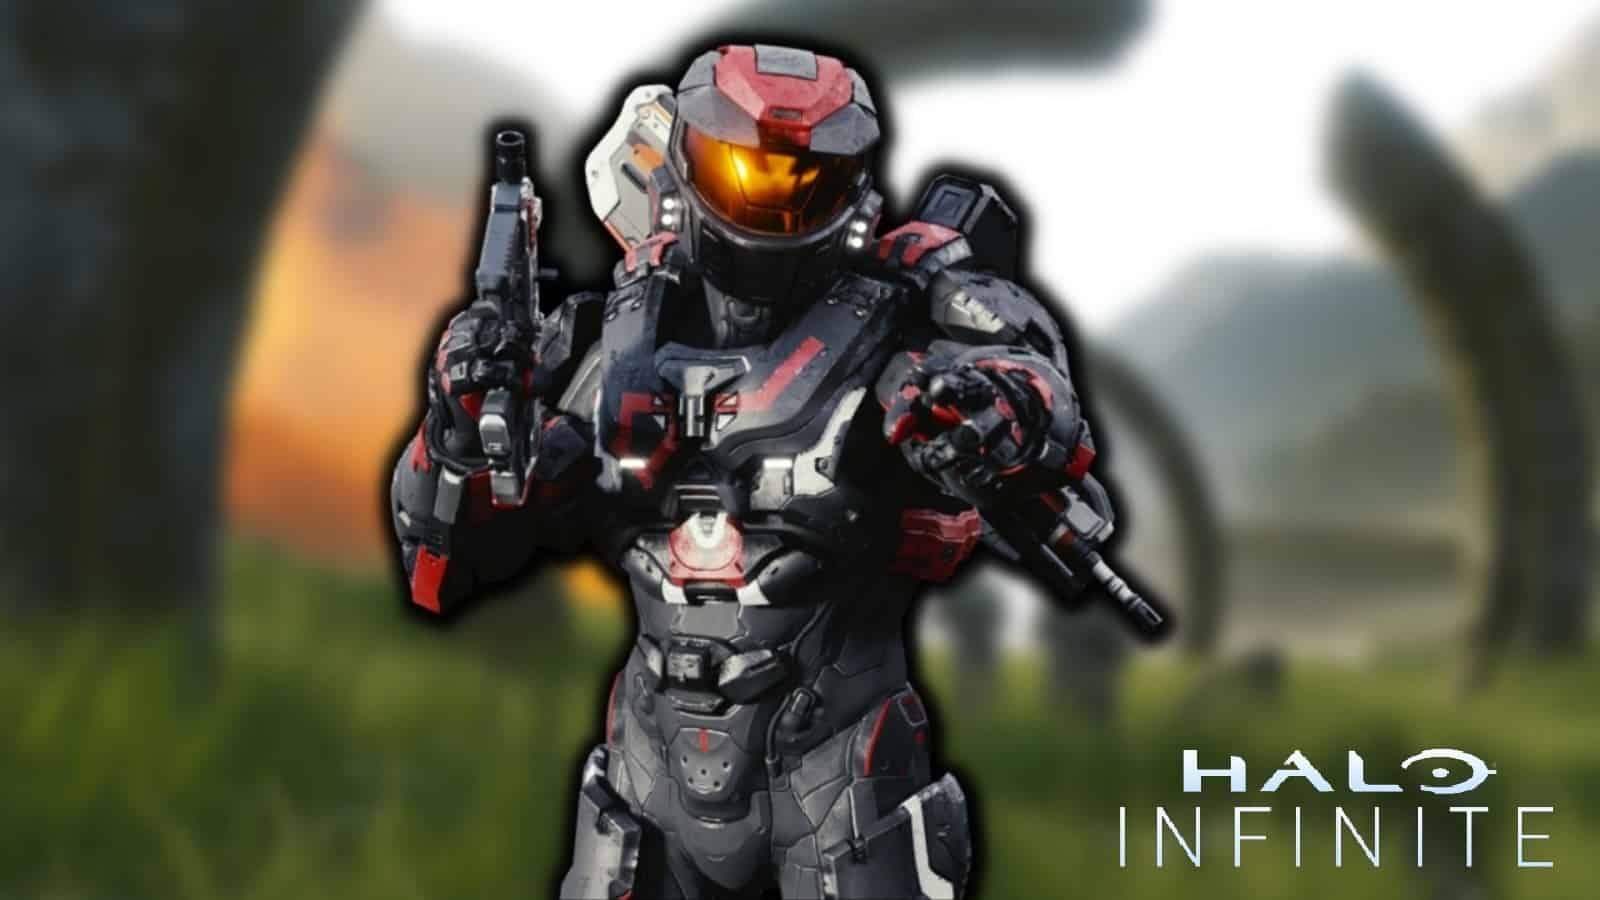 Halo Infinite Spartan standing in a field